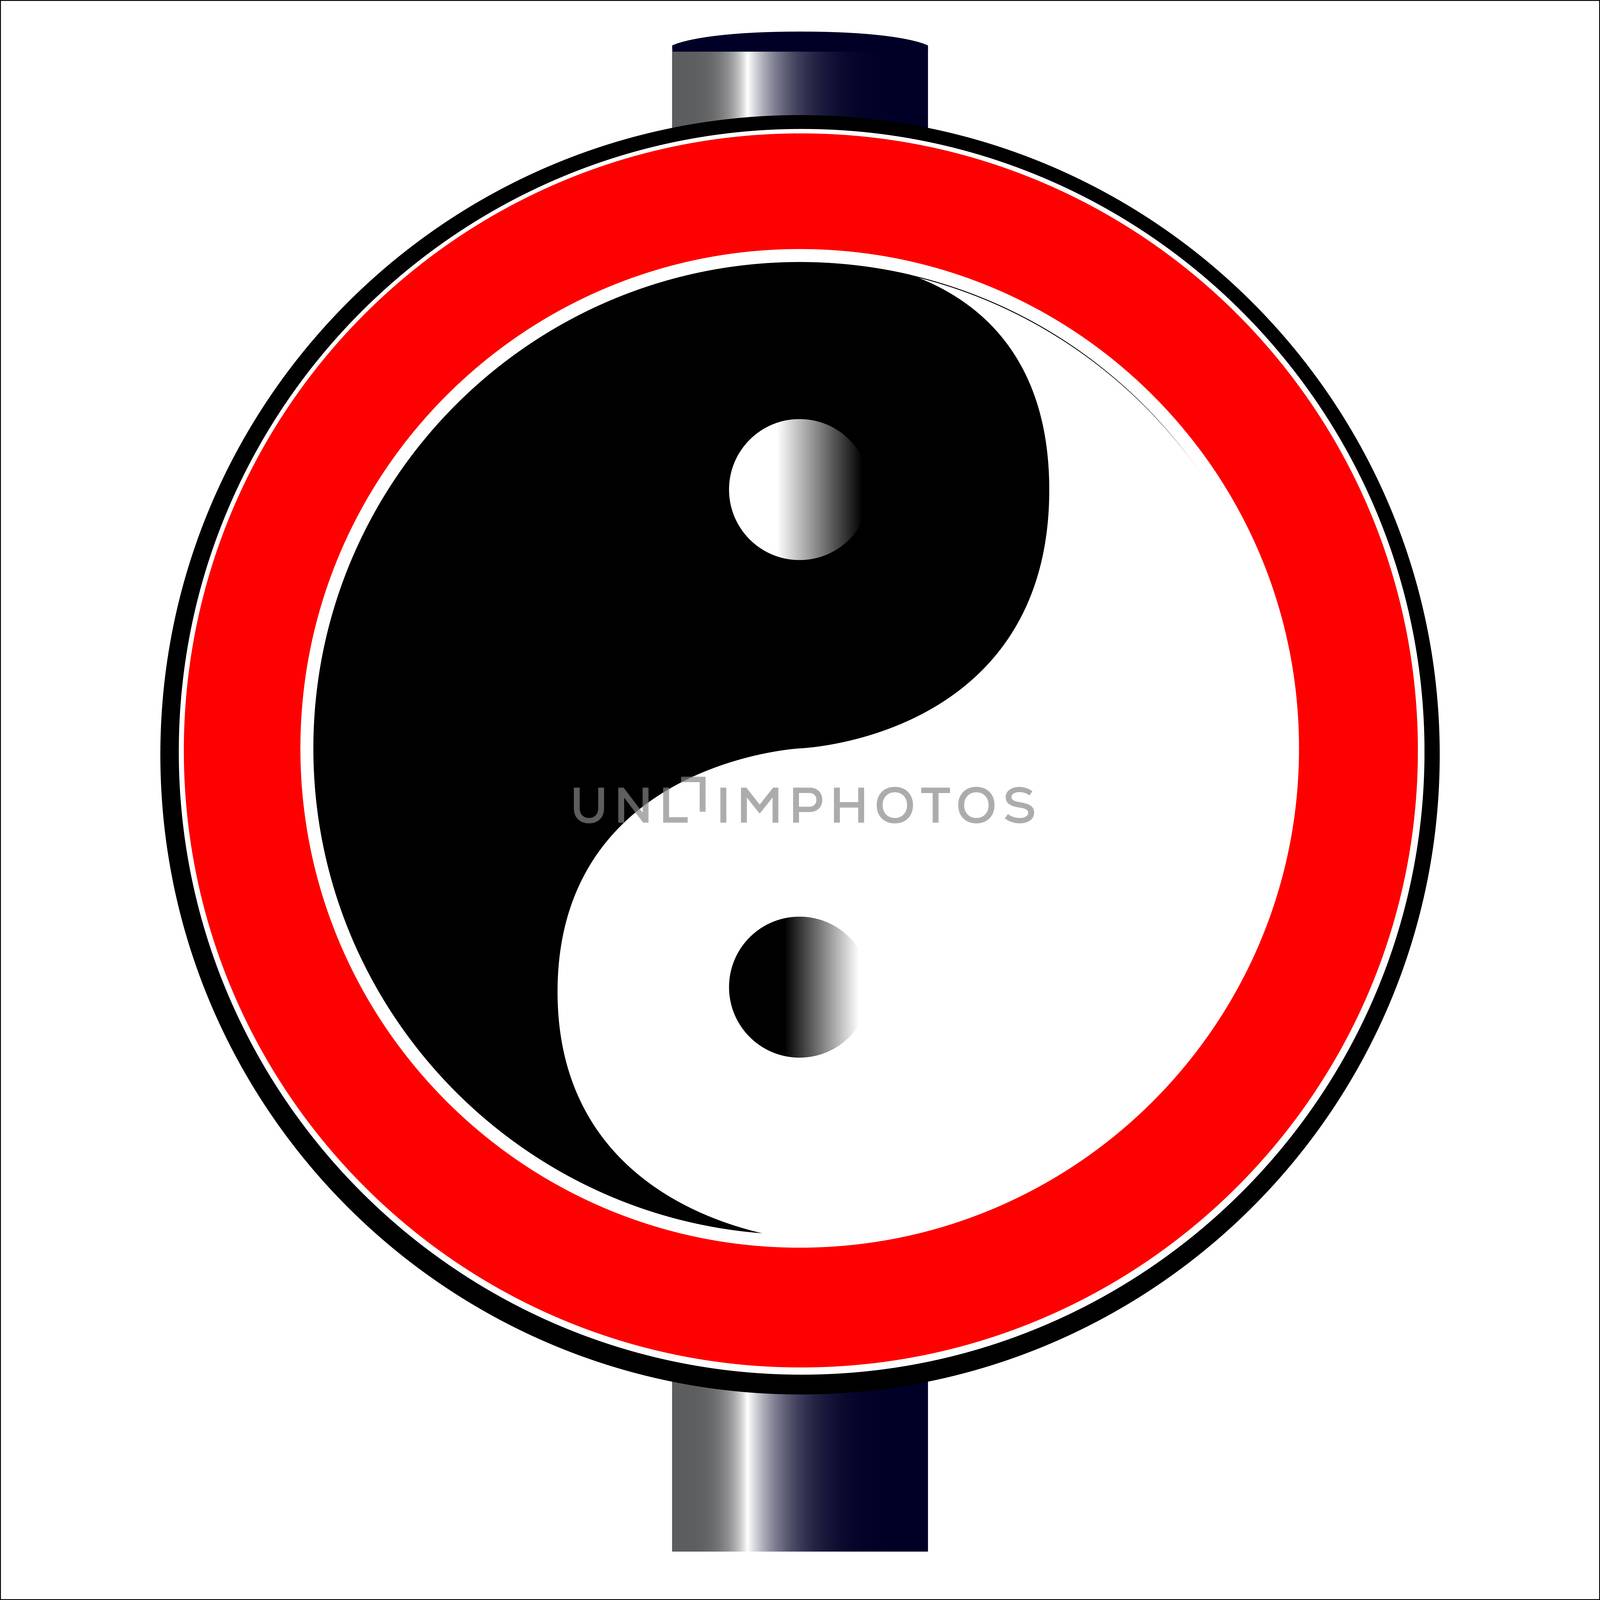 Yin and Yang in black and white in a traffic sign isolayed over white.